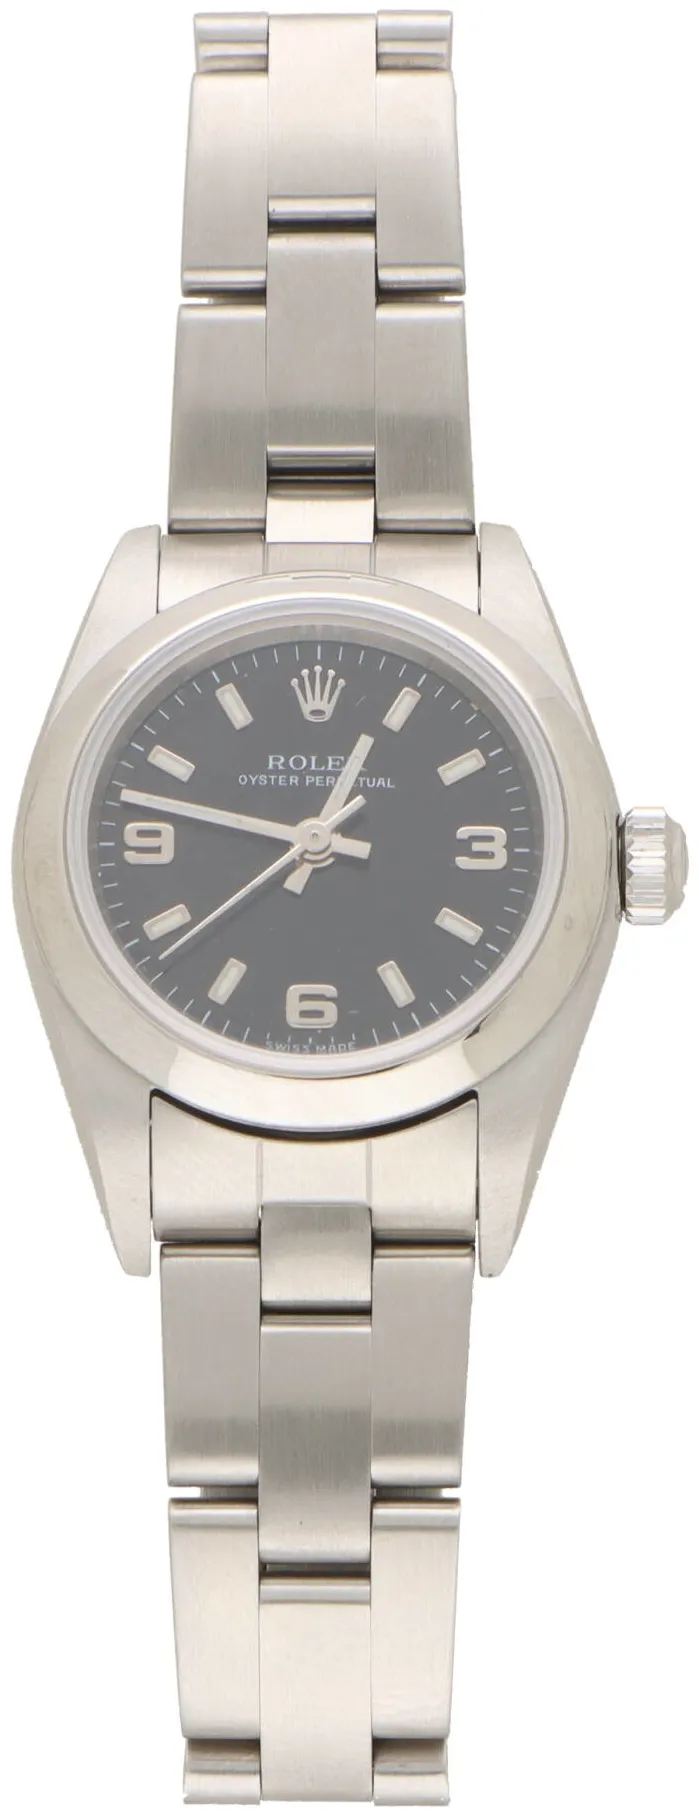 Rolex Oyster Perpetual 76080 25mm Stainless steel Black